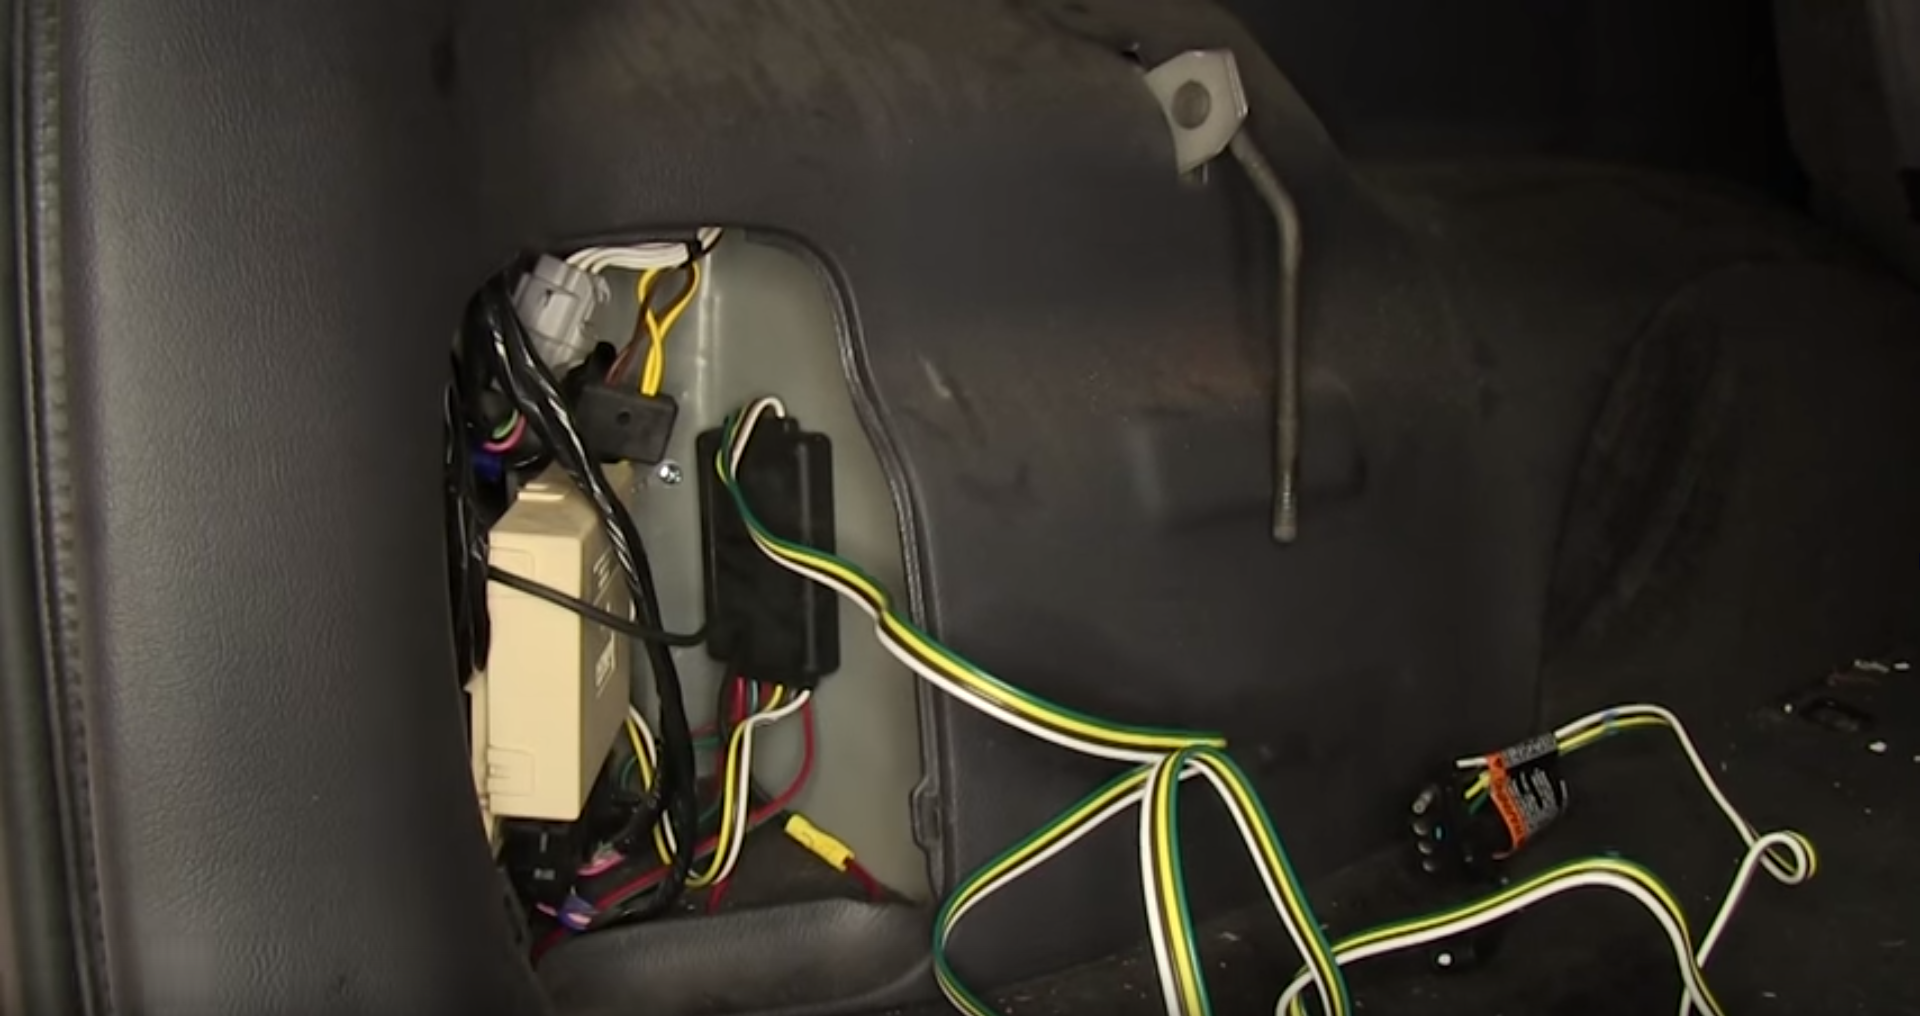 2004 Jeep Liberty Wiring Harness from cimg1.ibsrv.net